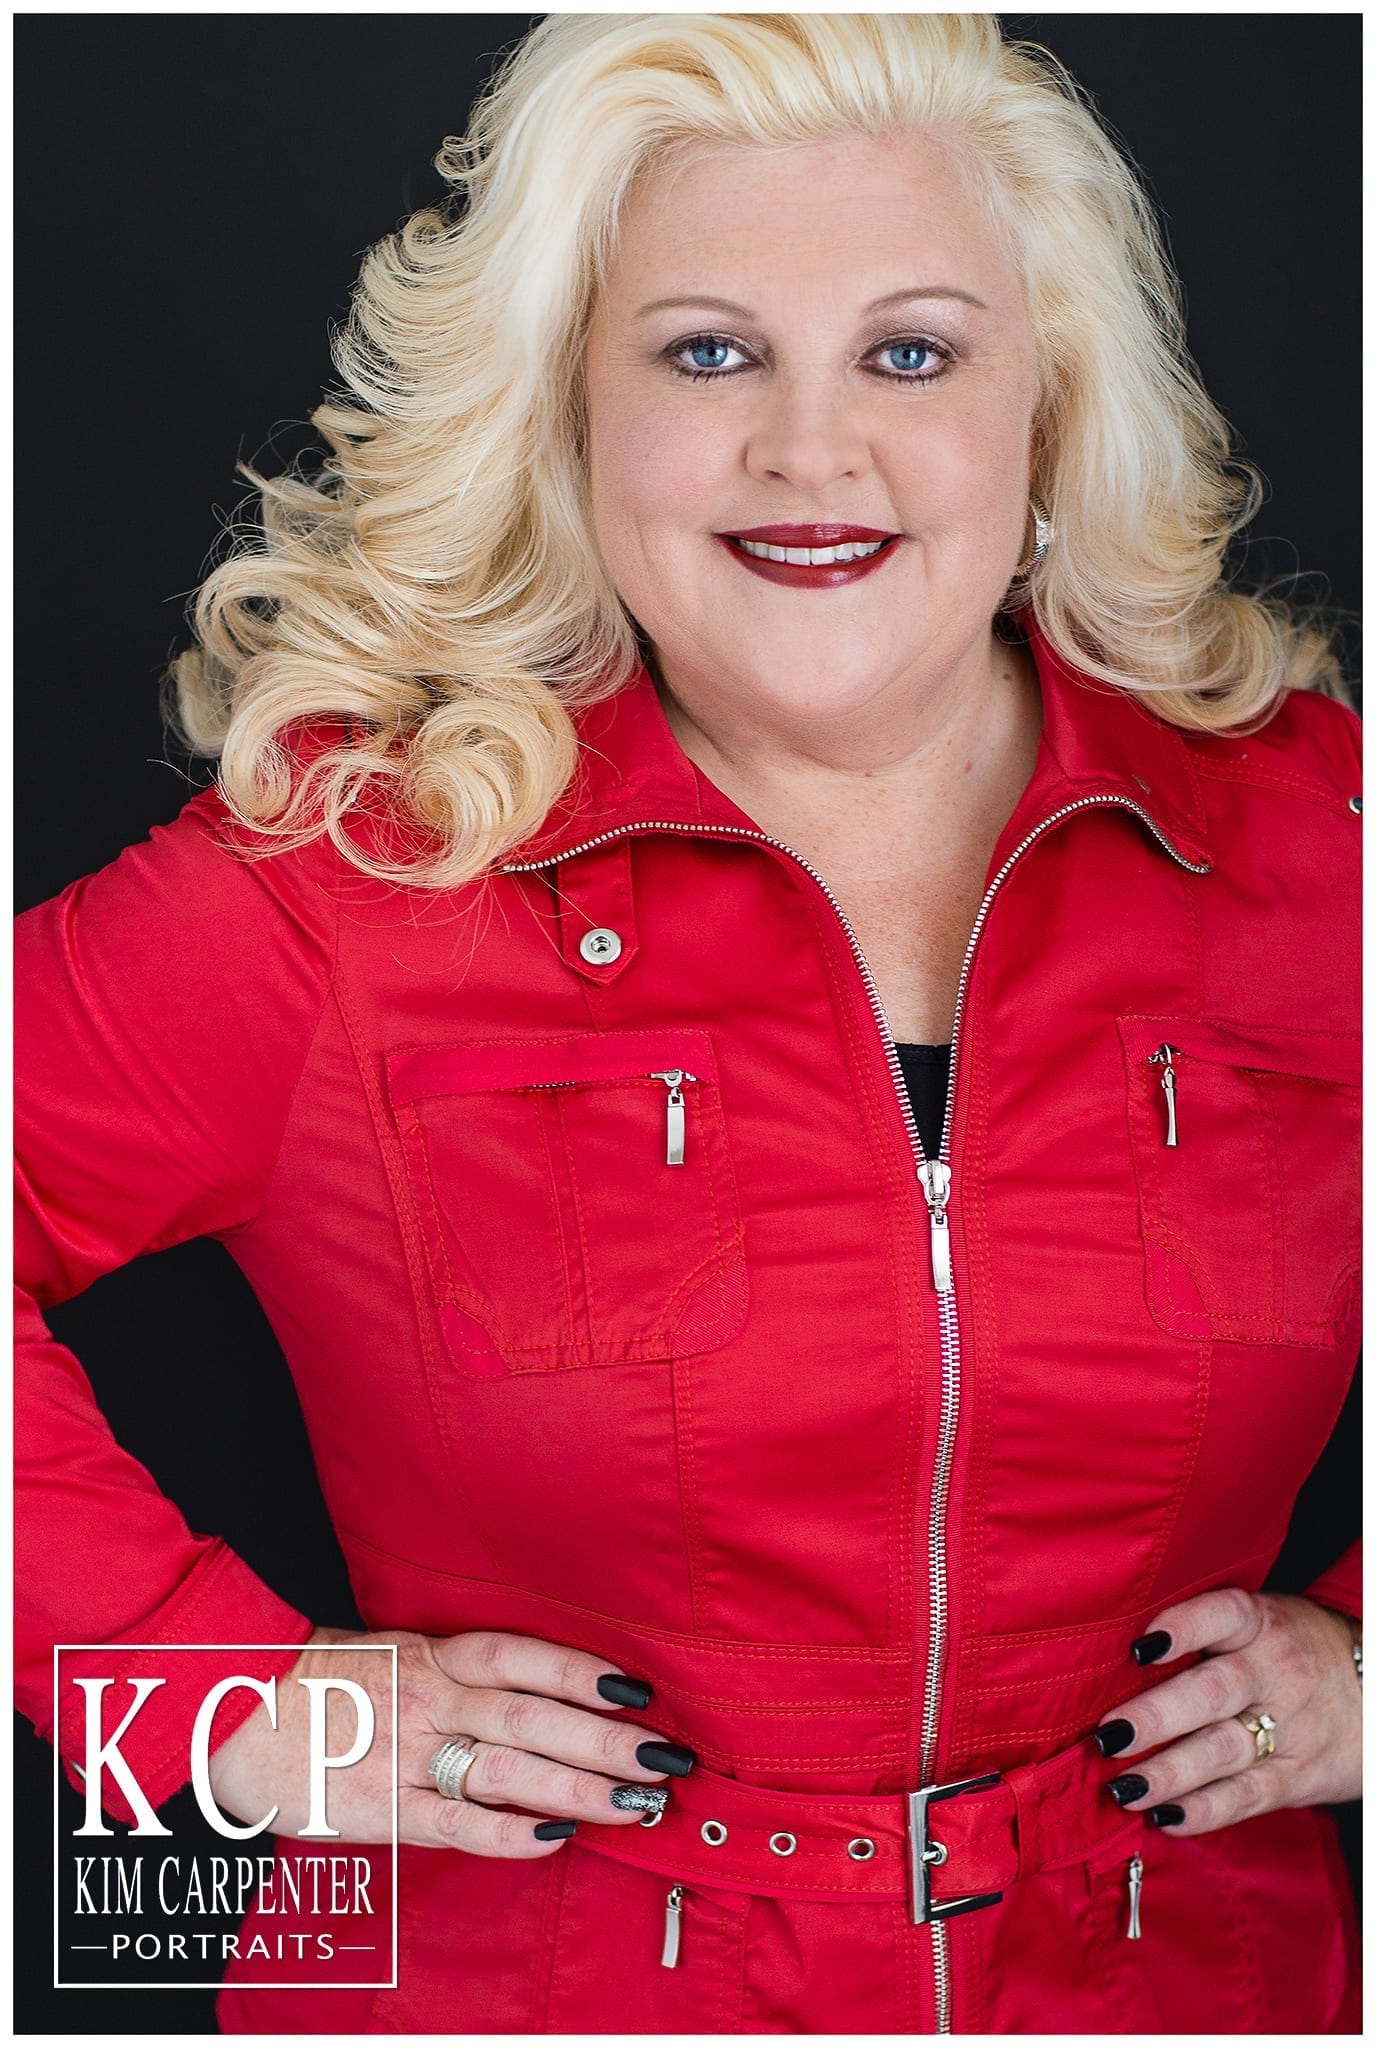 A close photograph of a woman wearing a bright red jacket with her hands on her hips. Lakeland Photographer, professional headshots